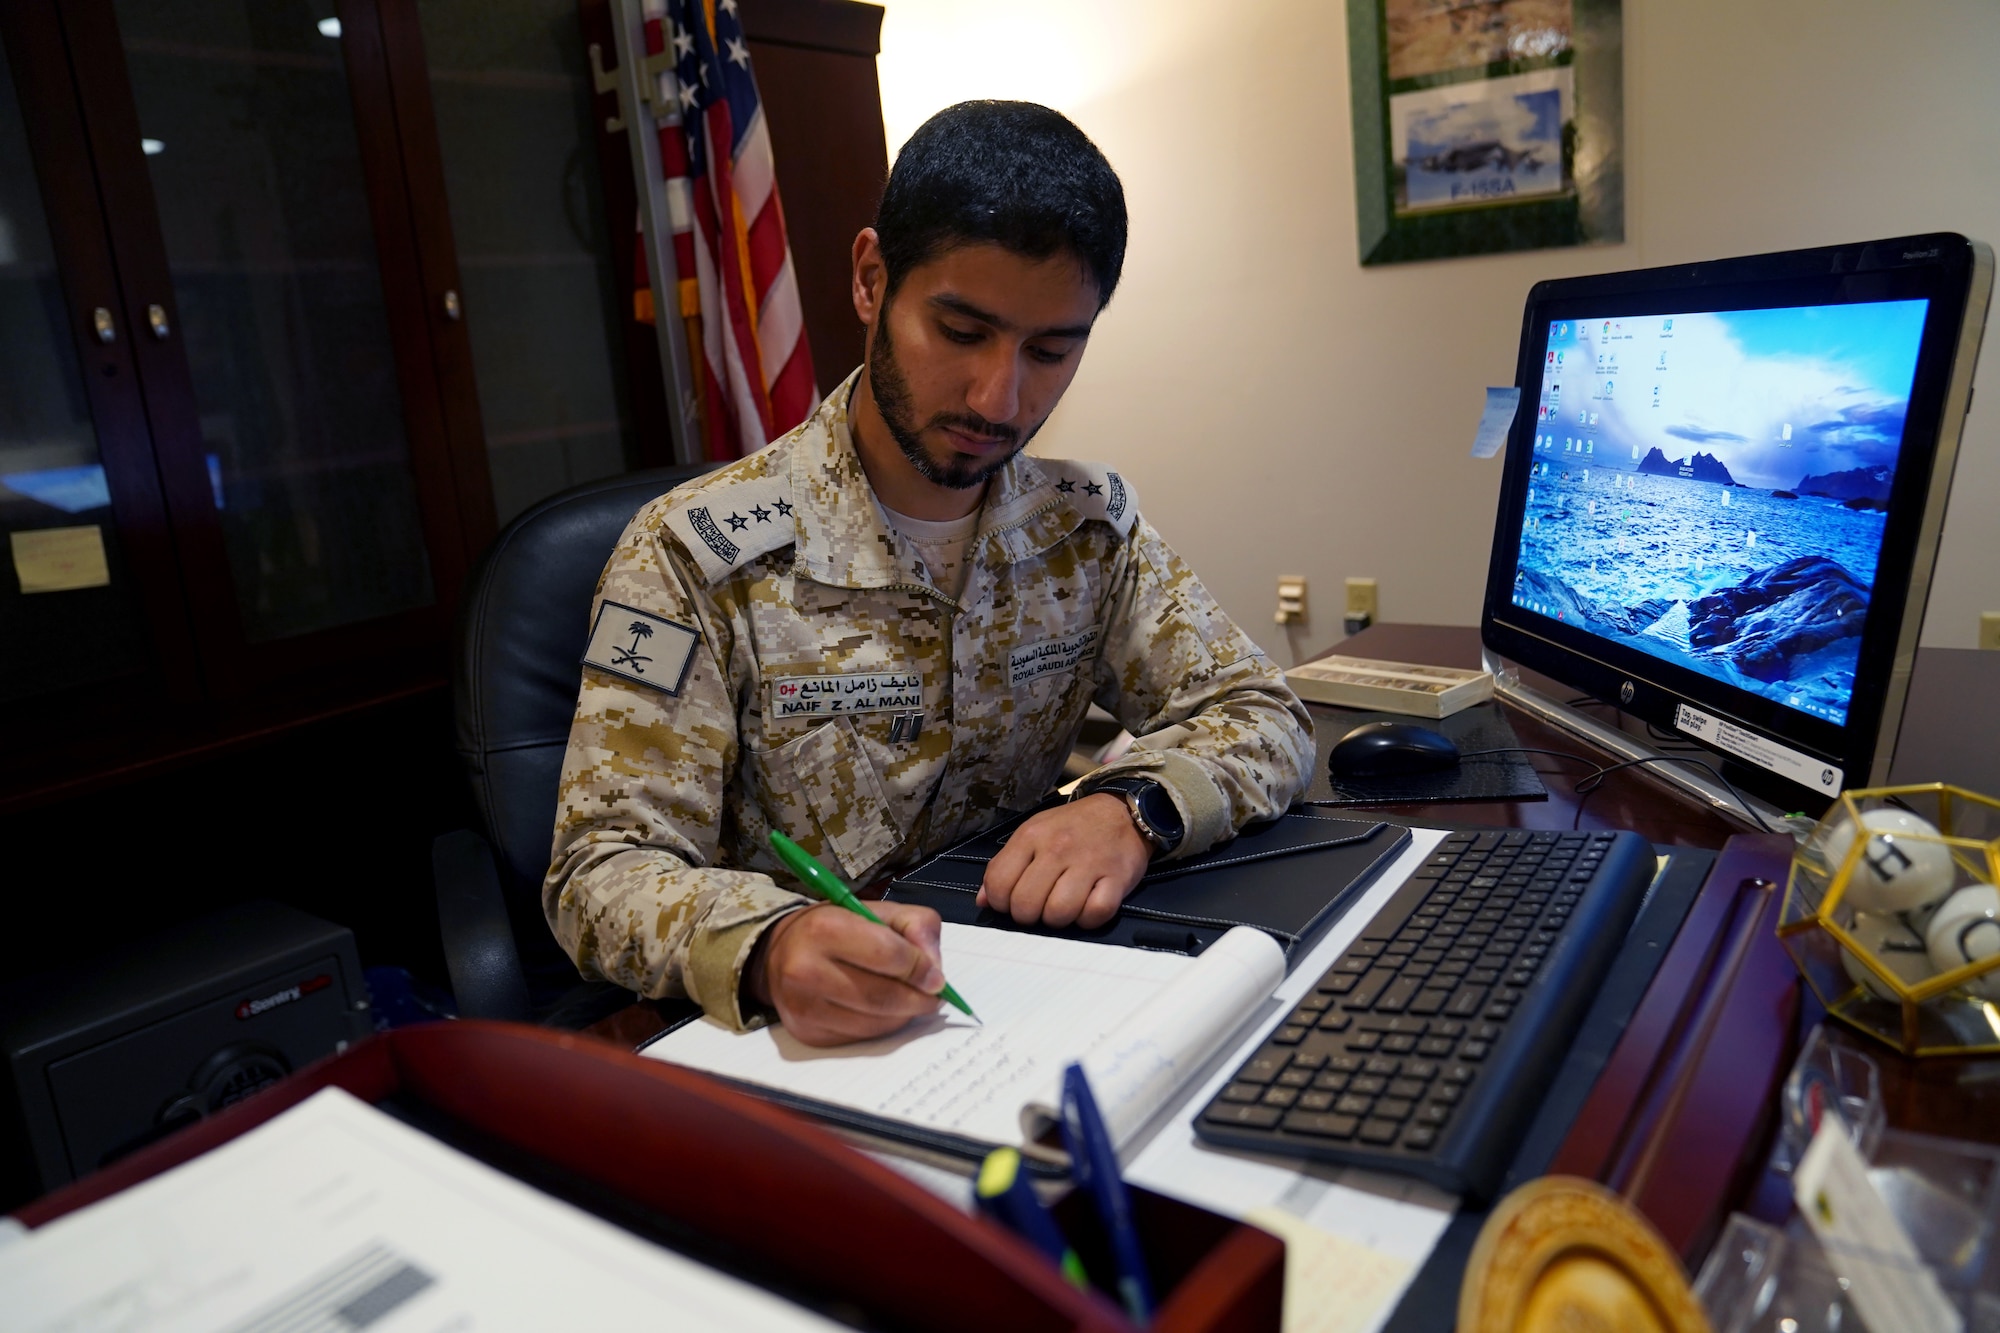 Royal Saudi air force Capt. Naif Almani, Keesler Saudi country liaison officer, performs his work duties at his desk inside the Volser Academic Development Center at Keesler Air Force Base, Mississippi, July 28, 2021. Almani provided his support for the local community by translating exams for a student in the Harrison County School District. (U.S. Air Force photo by Senior Airman Seth Haddix)